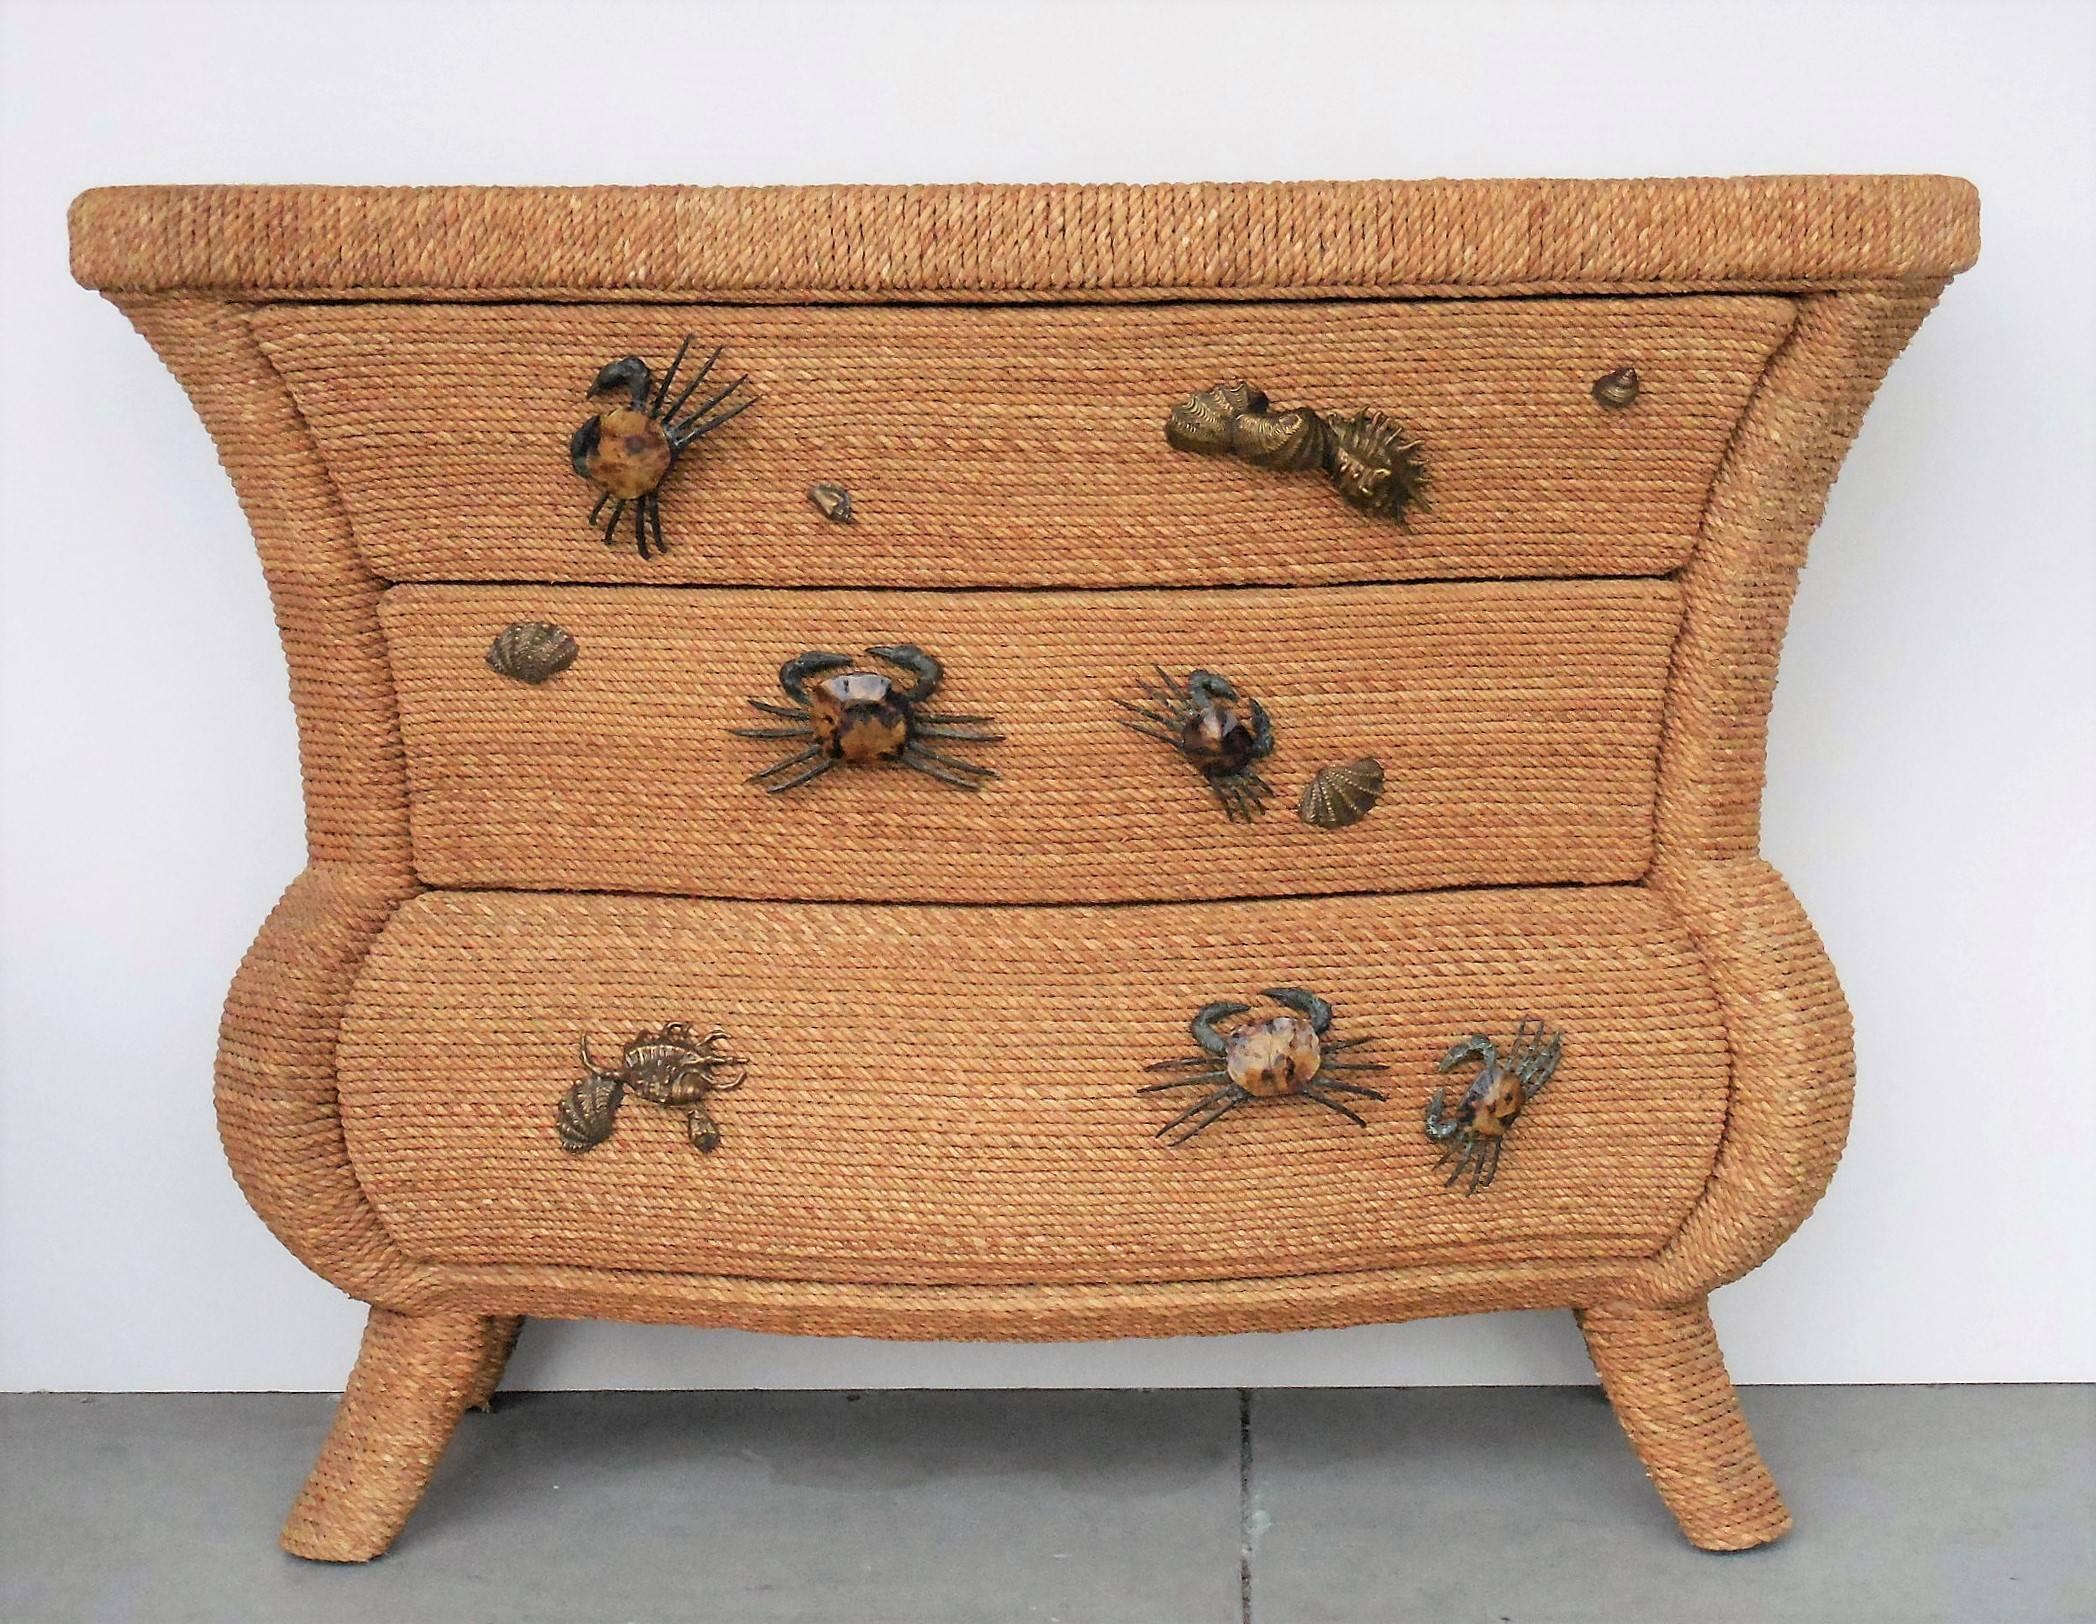 Stunning chest or console by Maitland Smith. Very much in the style of Christian Astugueiveille. The whole cabinet is meticulously covered with maguey rope and there are life-size crabs crawling on the front along with clusters of sea shells. Both